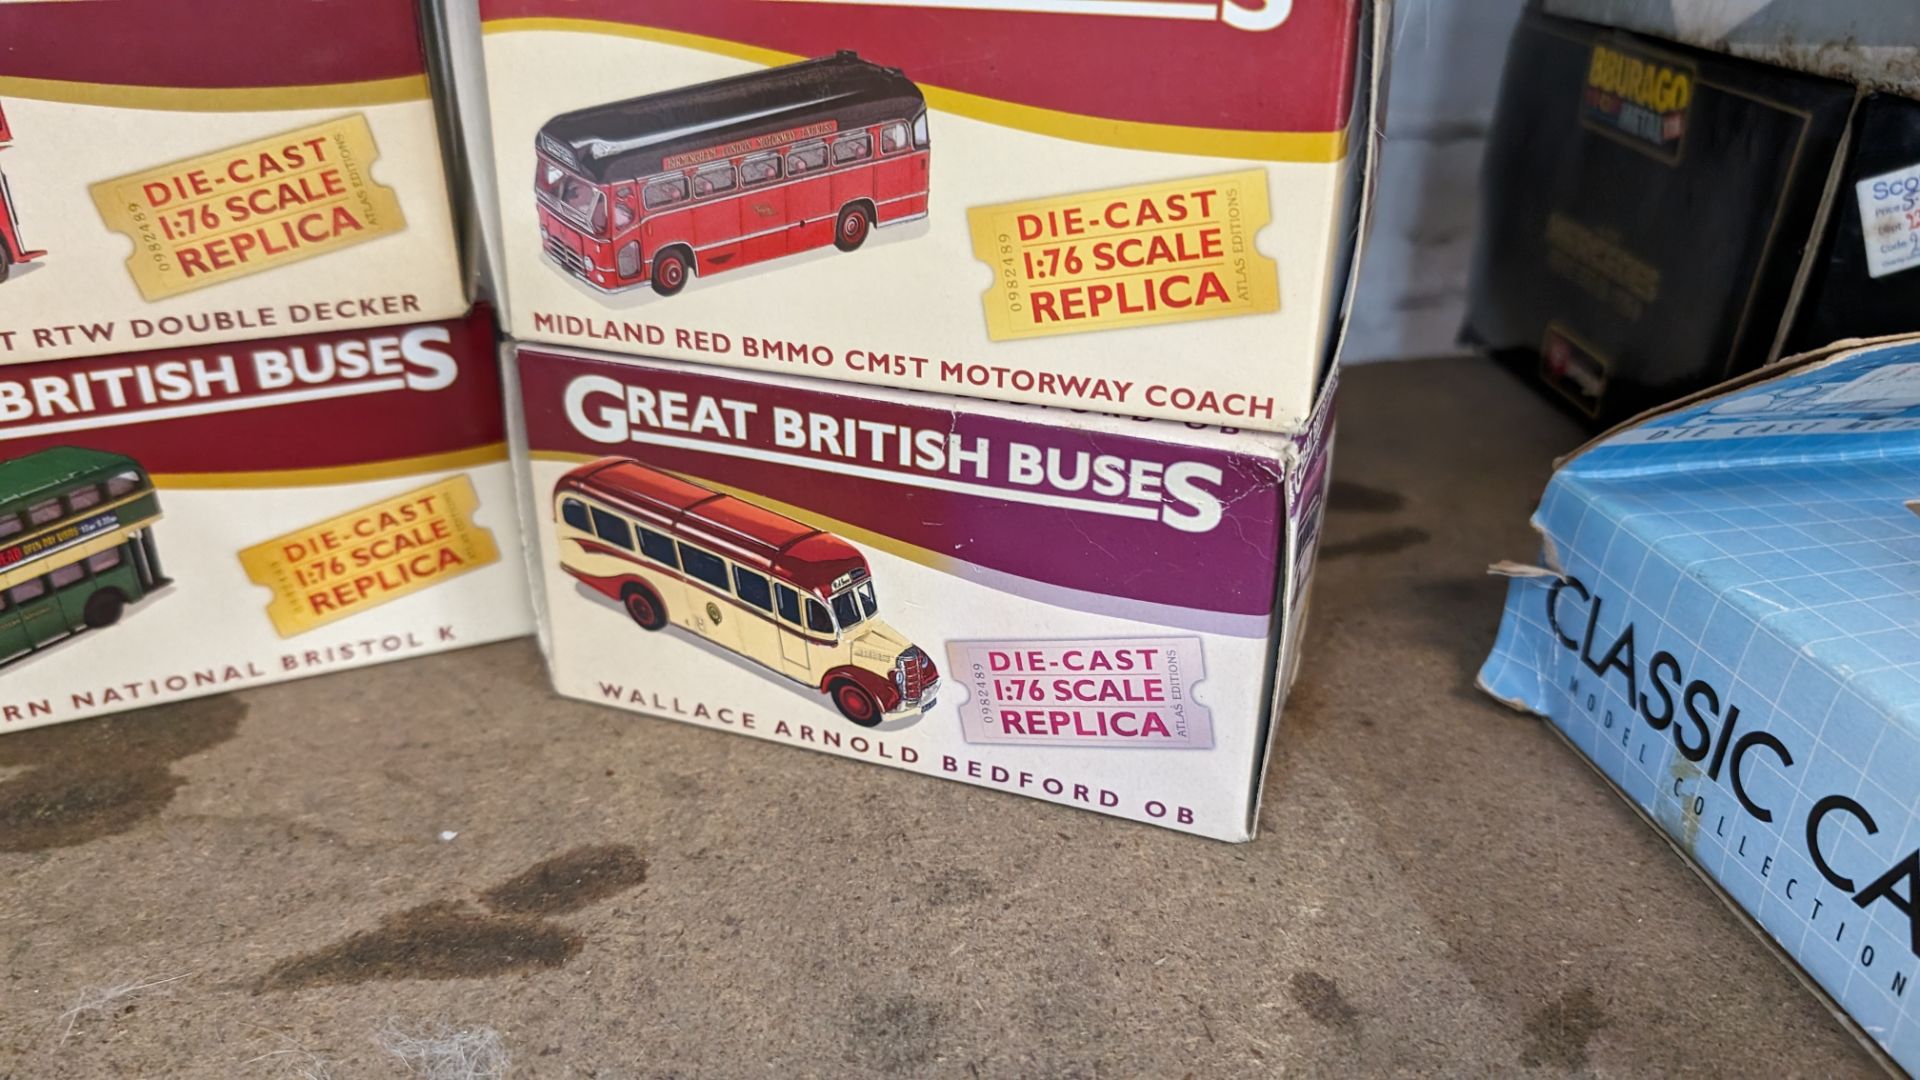 5 assorted Great British Buses die-cast replica buses, 1:76 scale - Image 7 of 9